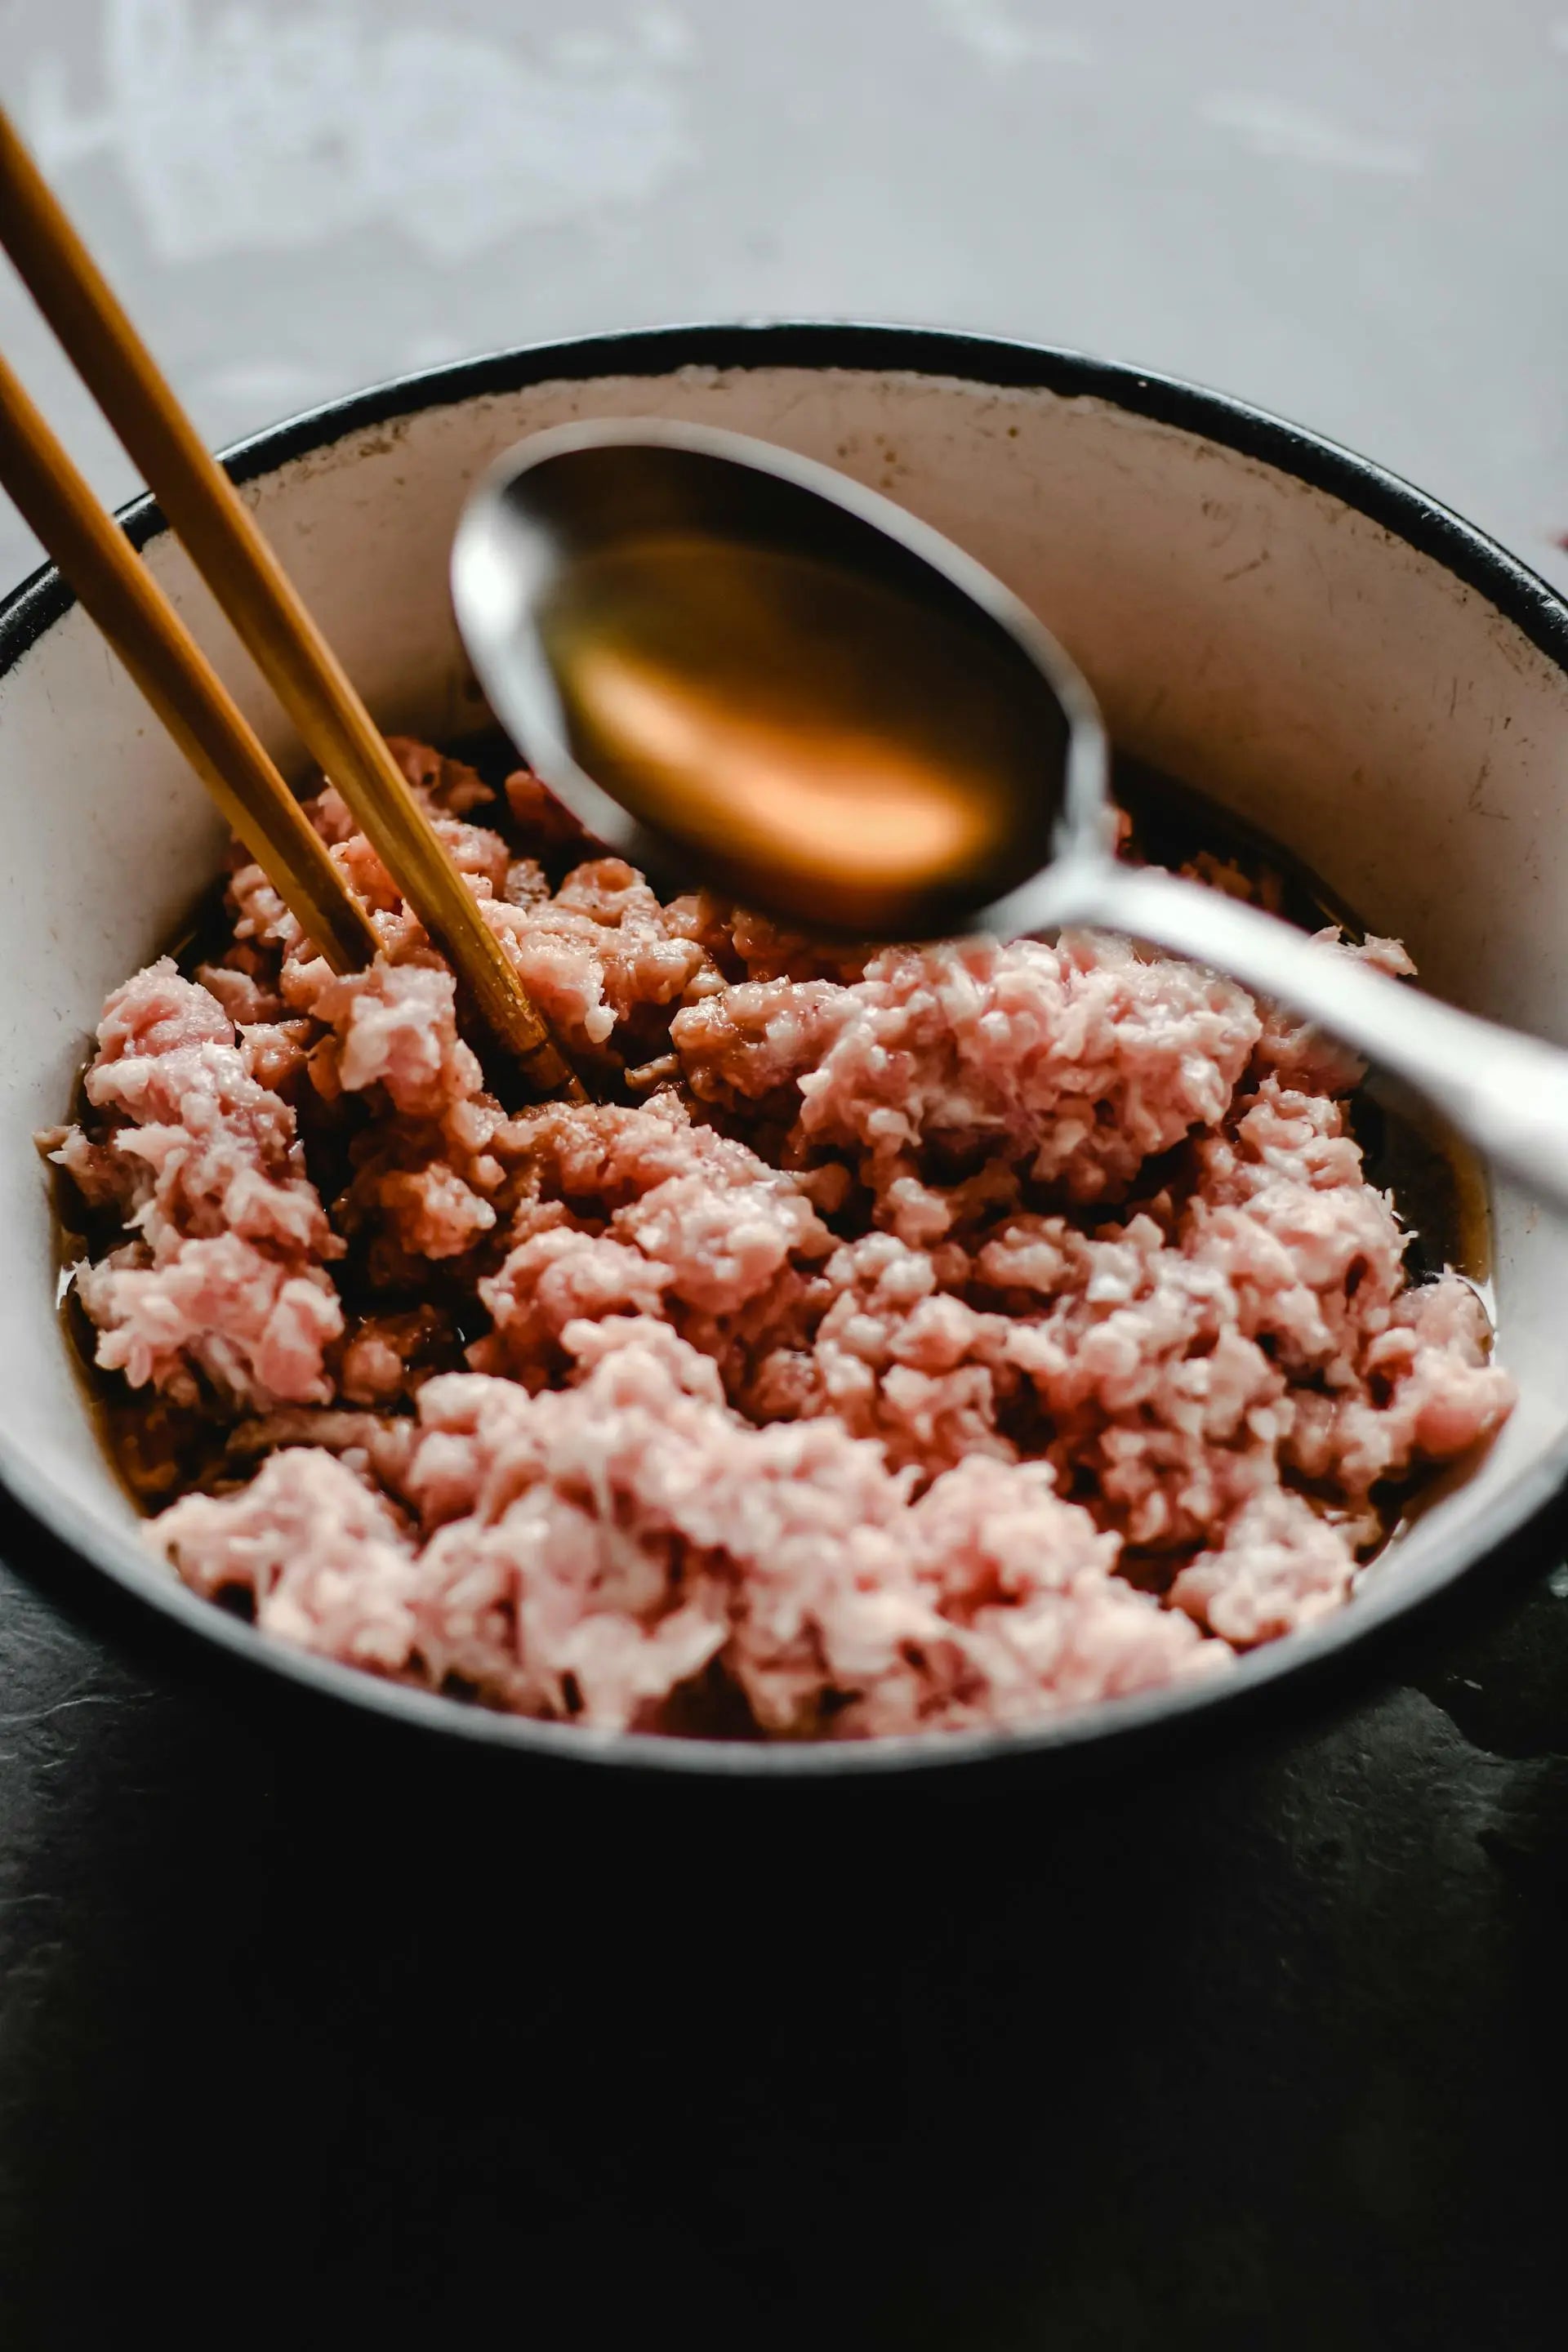 How-Long-Can-Ground-Meat-Stay-In-The-Fridge | Fridge.com